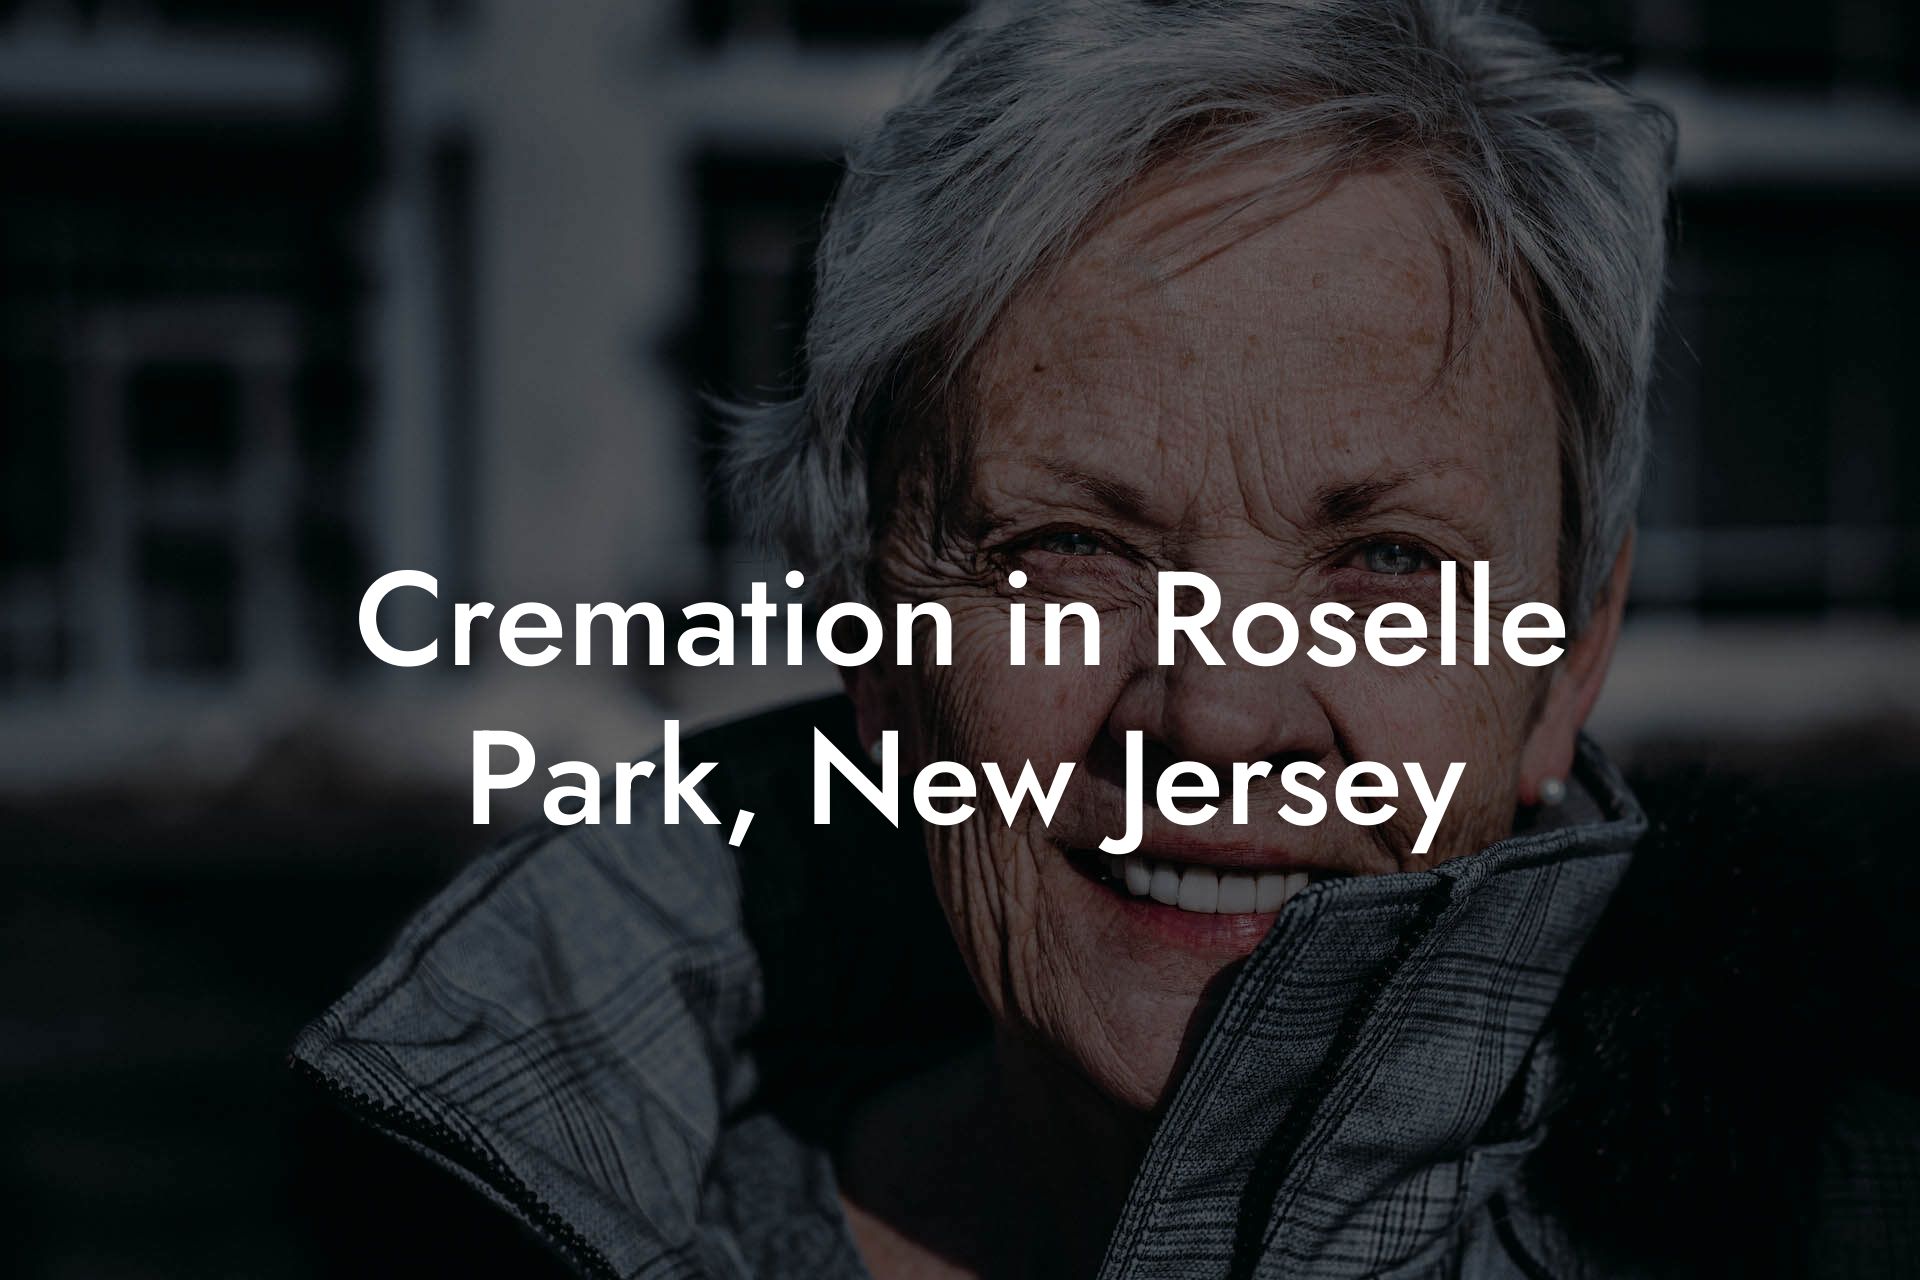 Cremation in Roselle Park, New Jersey